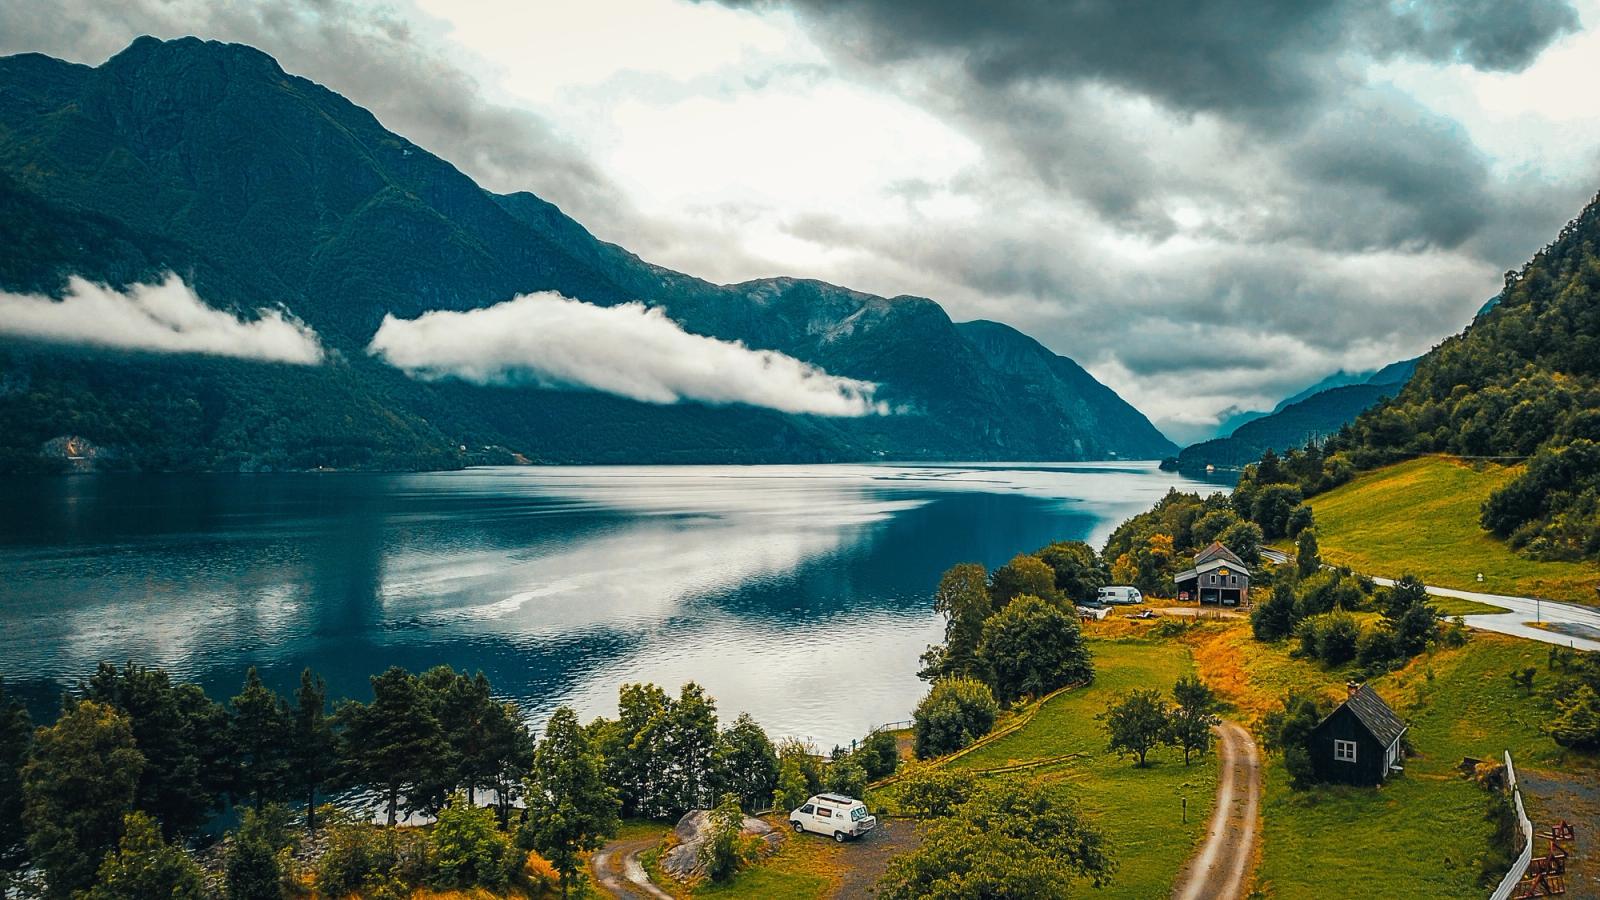 Camping on a farm by the water in a fjord in Norway